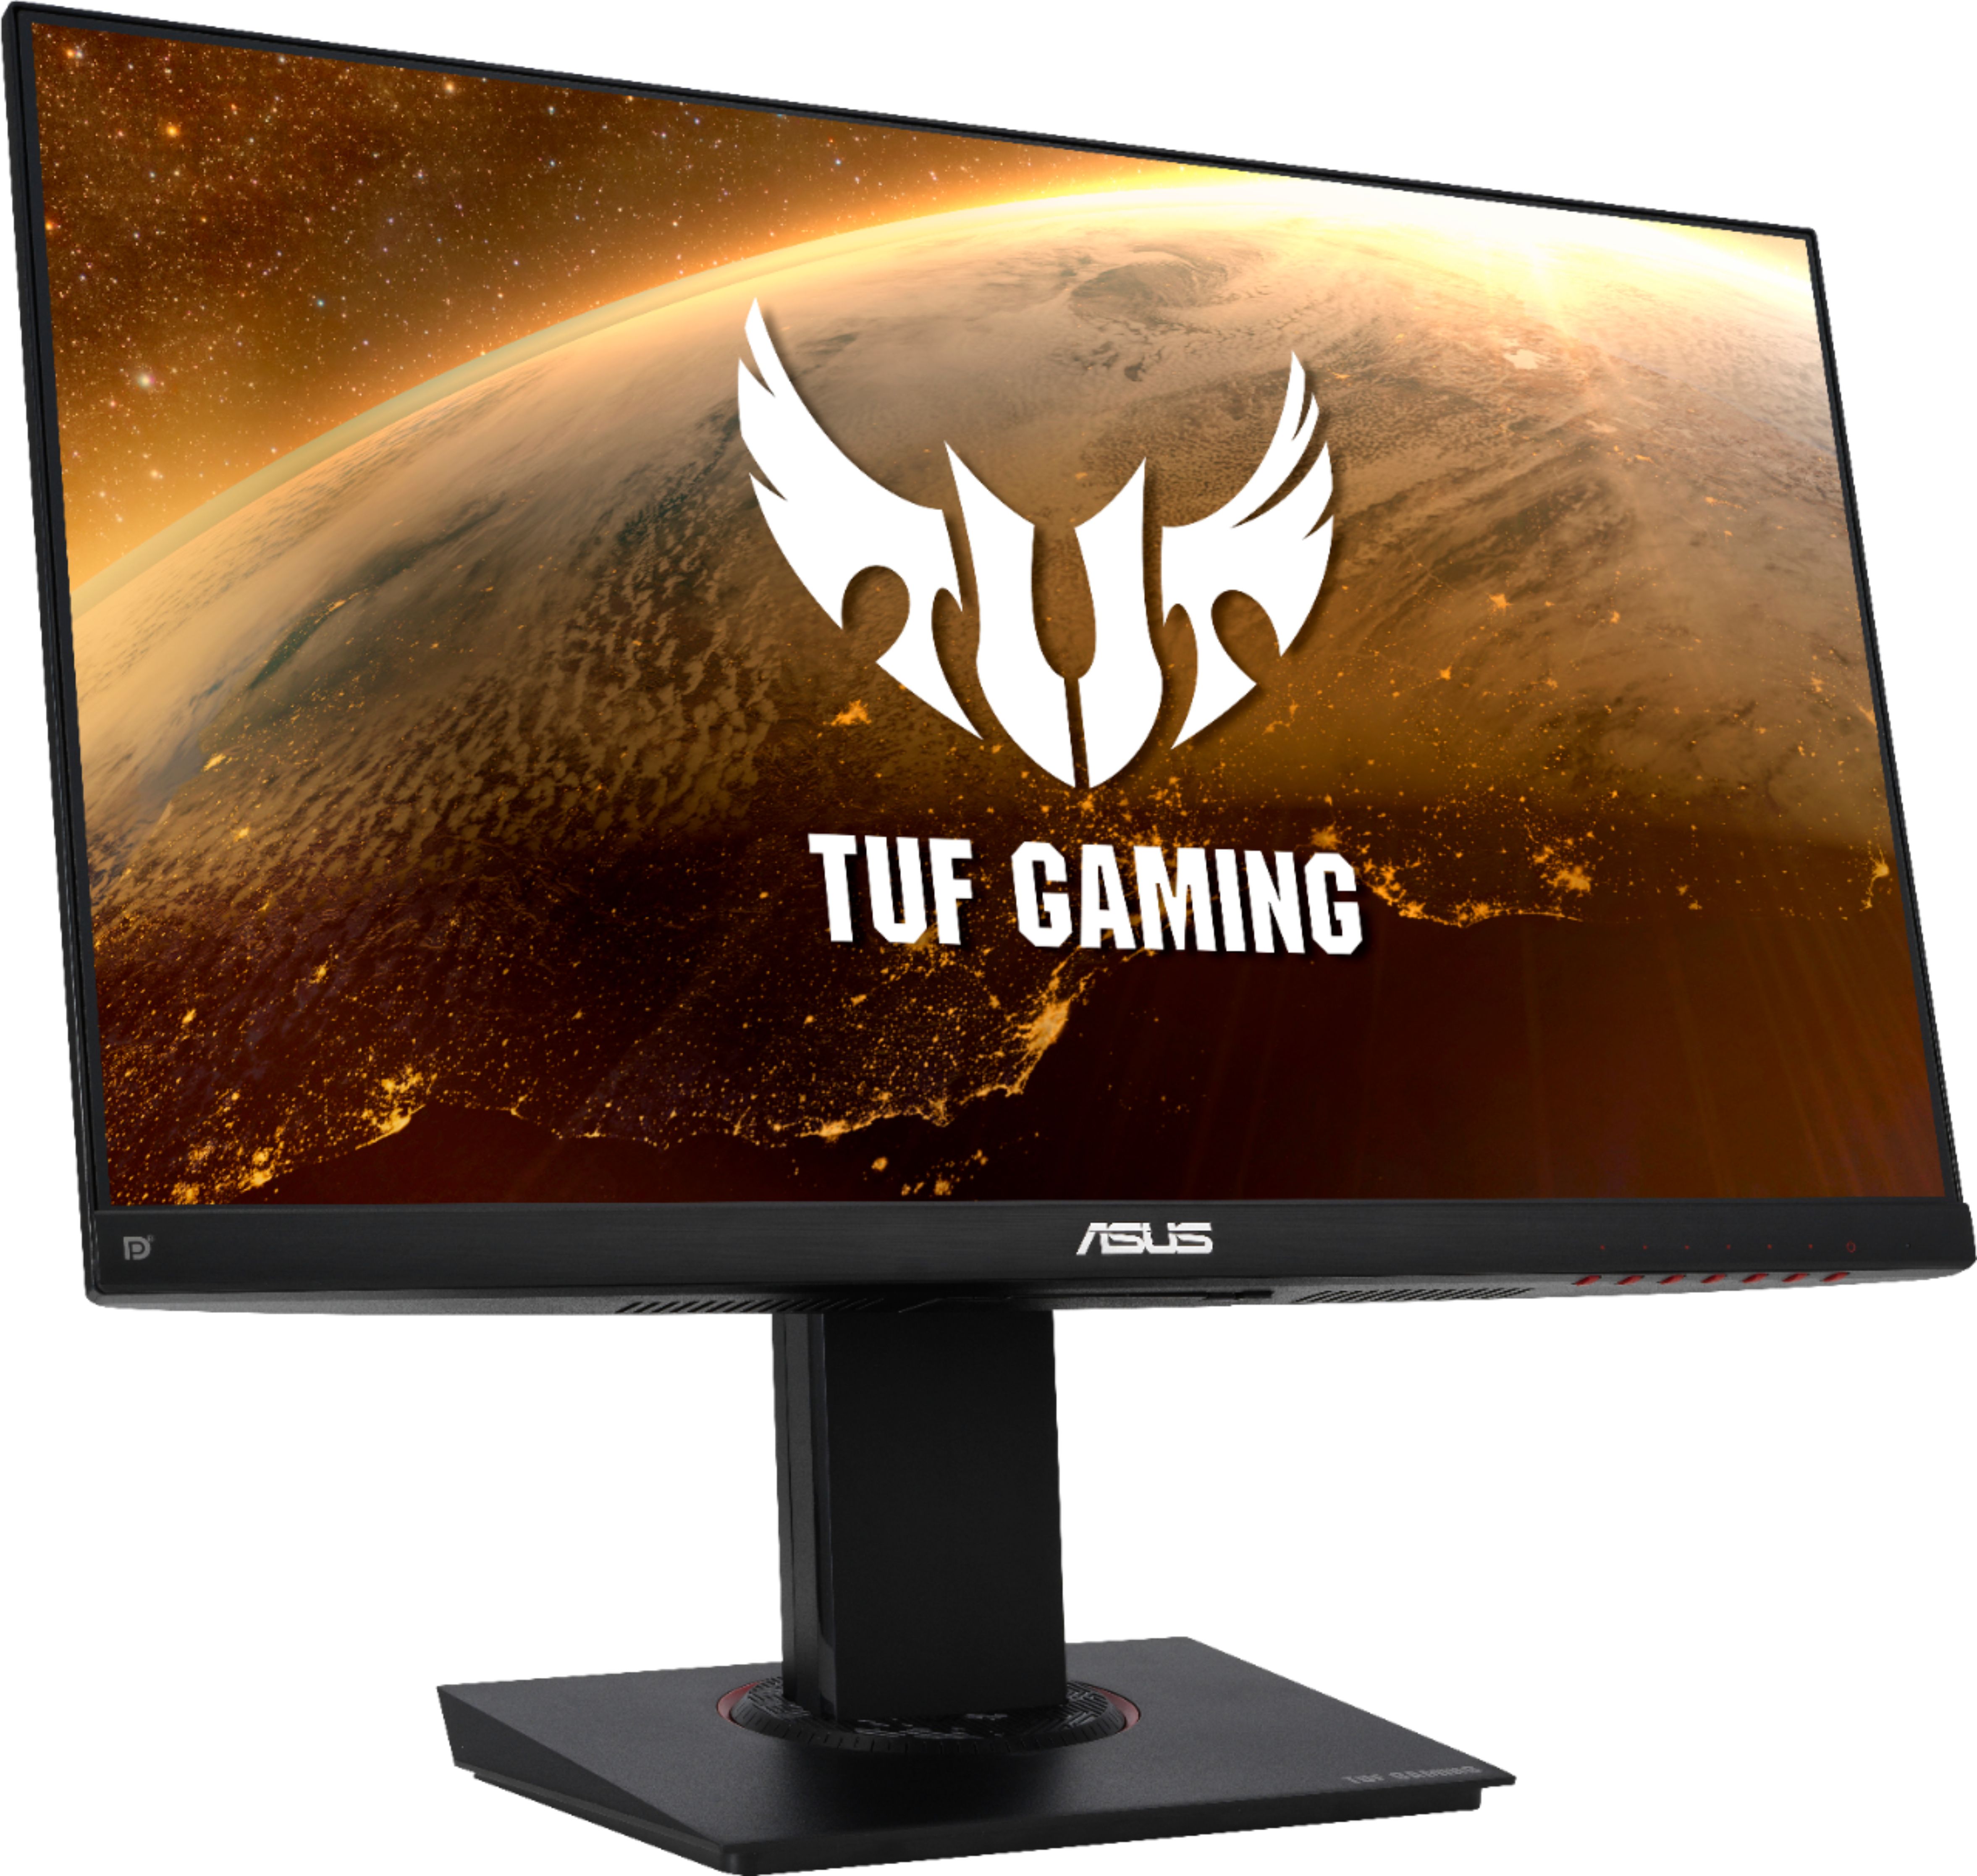 Angle View: ASUS - Geek Squad Certified Refurbished TUF Gaming 23.8" IPS LED FHD FreeSync Monitor - Black